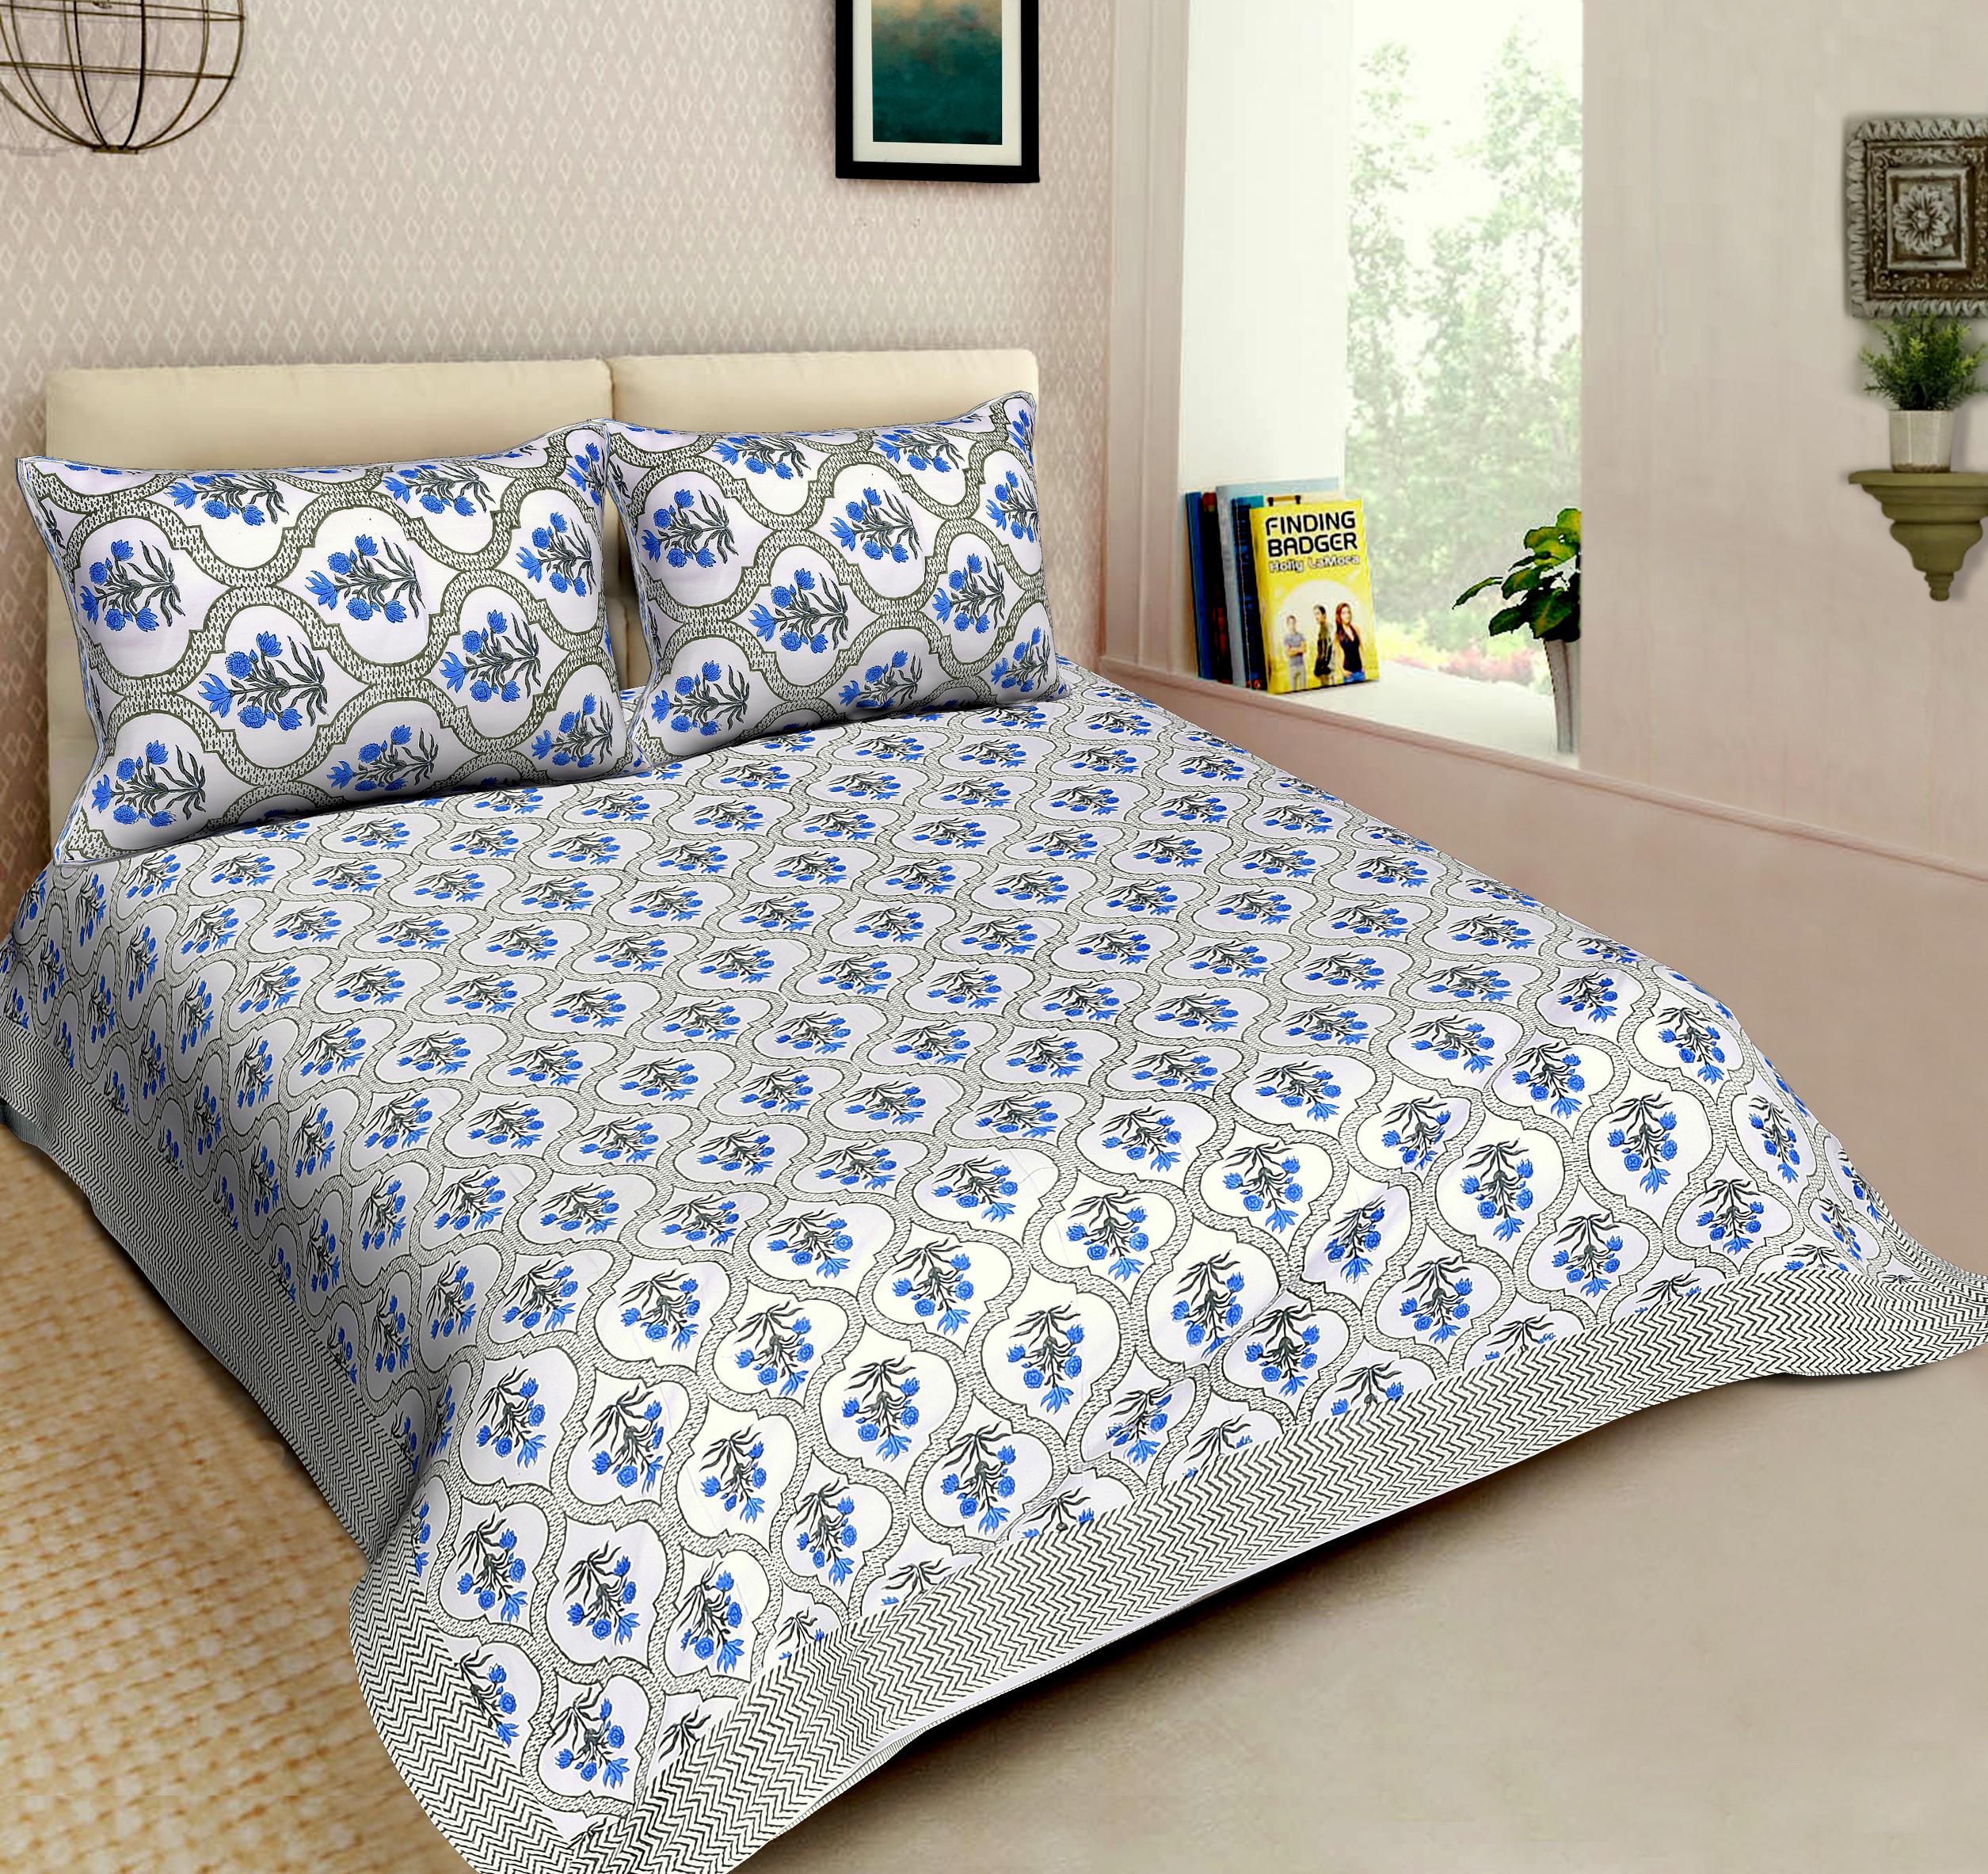 Mom's Home Organic Cotton Double Bed- Soft and Light Weight Comfortor/Quilt - Pot - 90"*108''